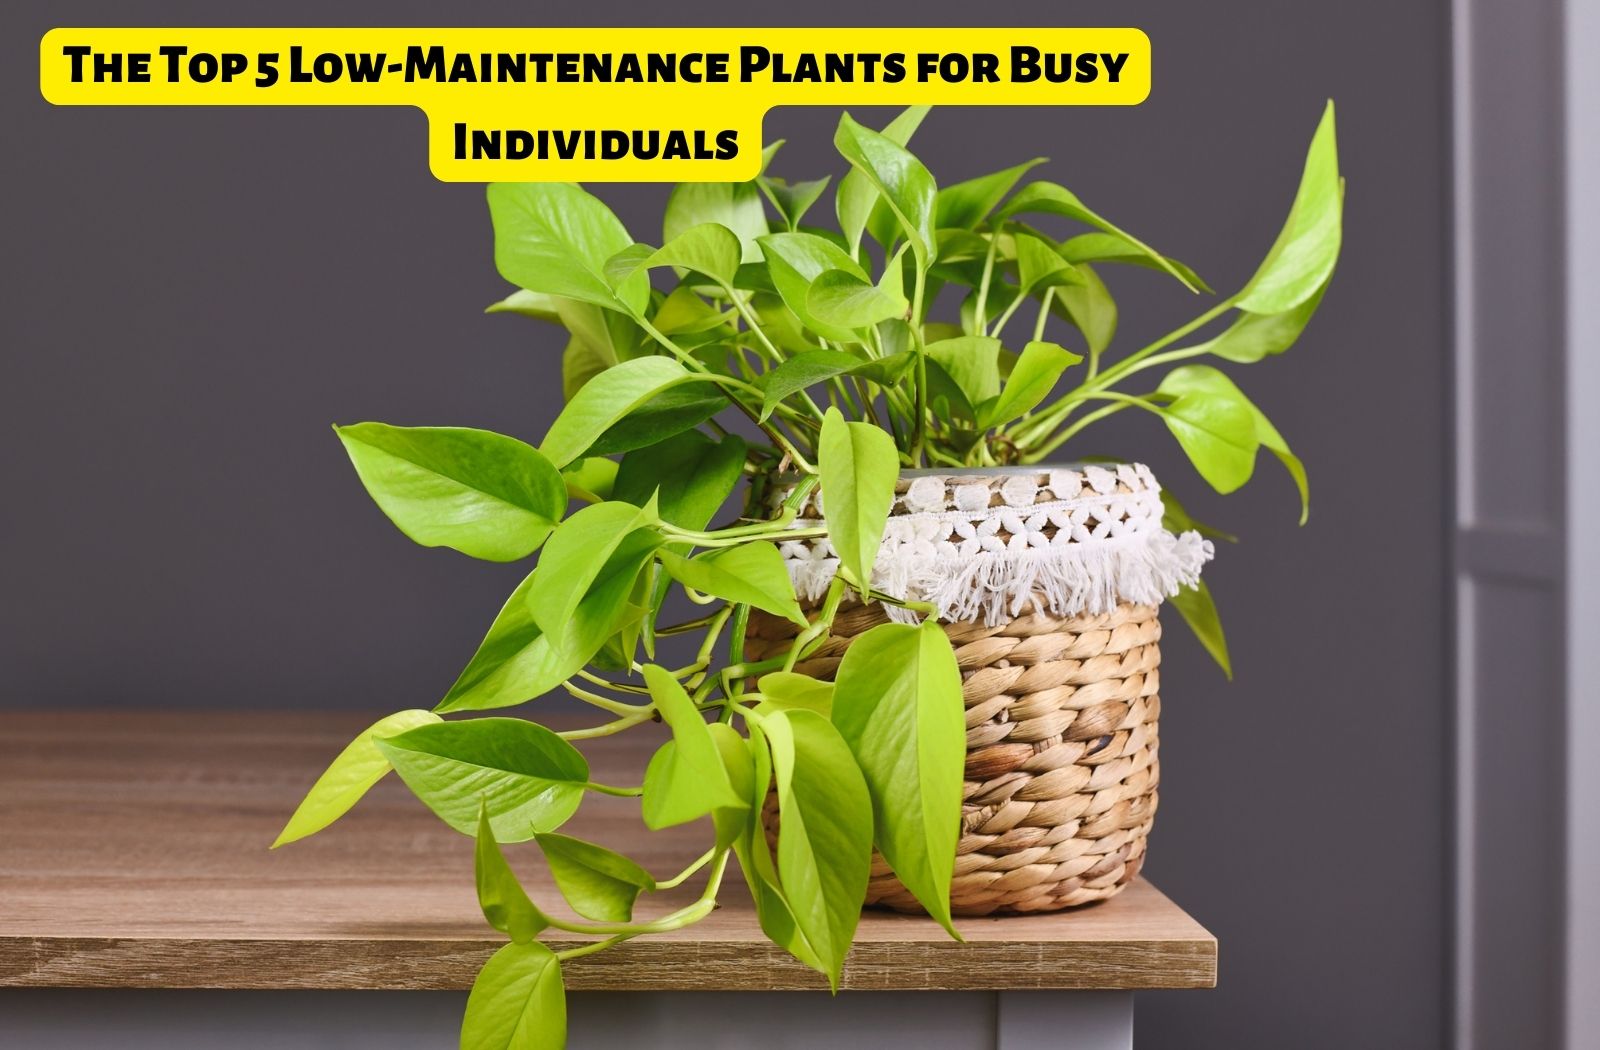 Gardening Simplified: The Top 5 Low-Maintenance Plants for Busy Individuals